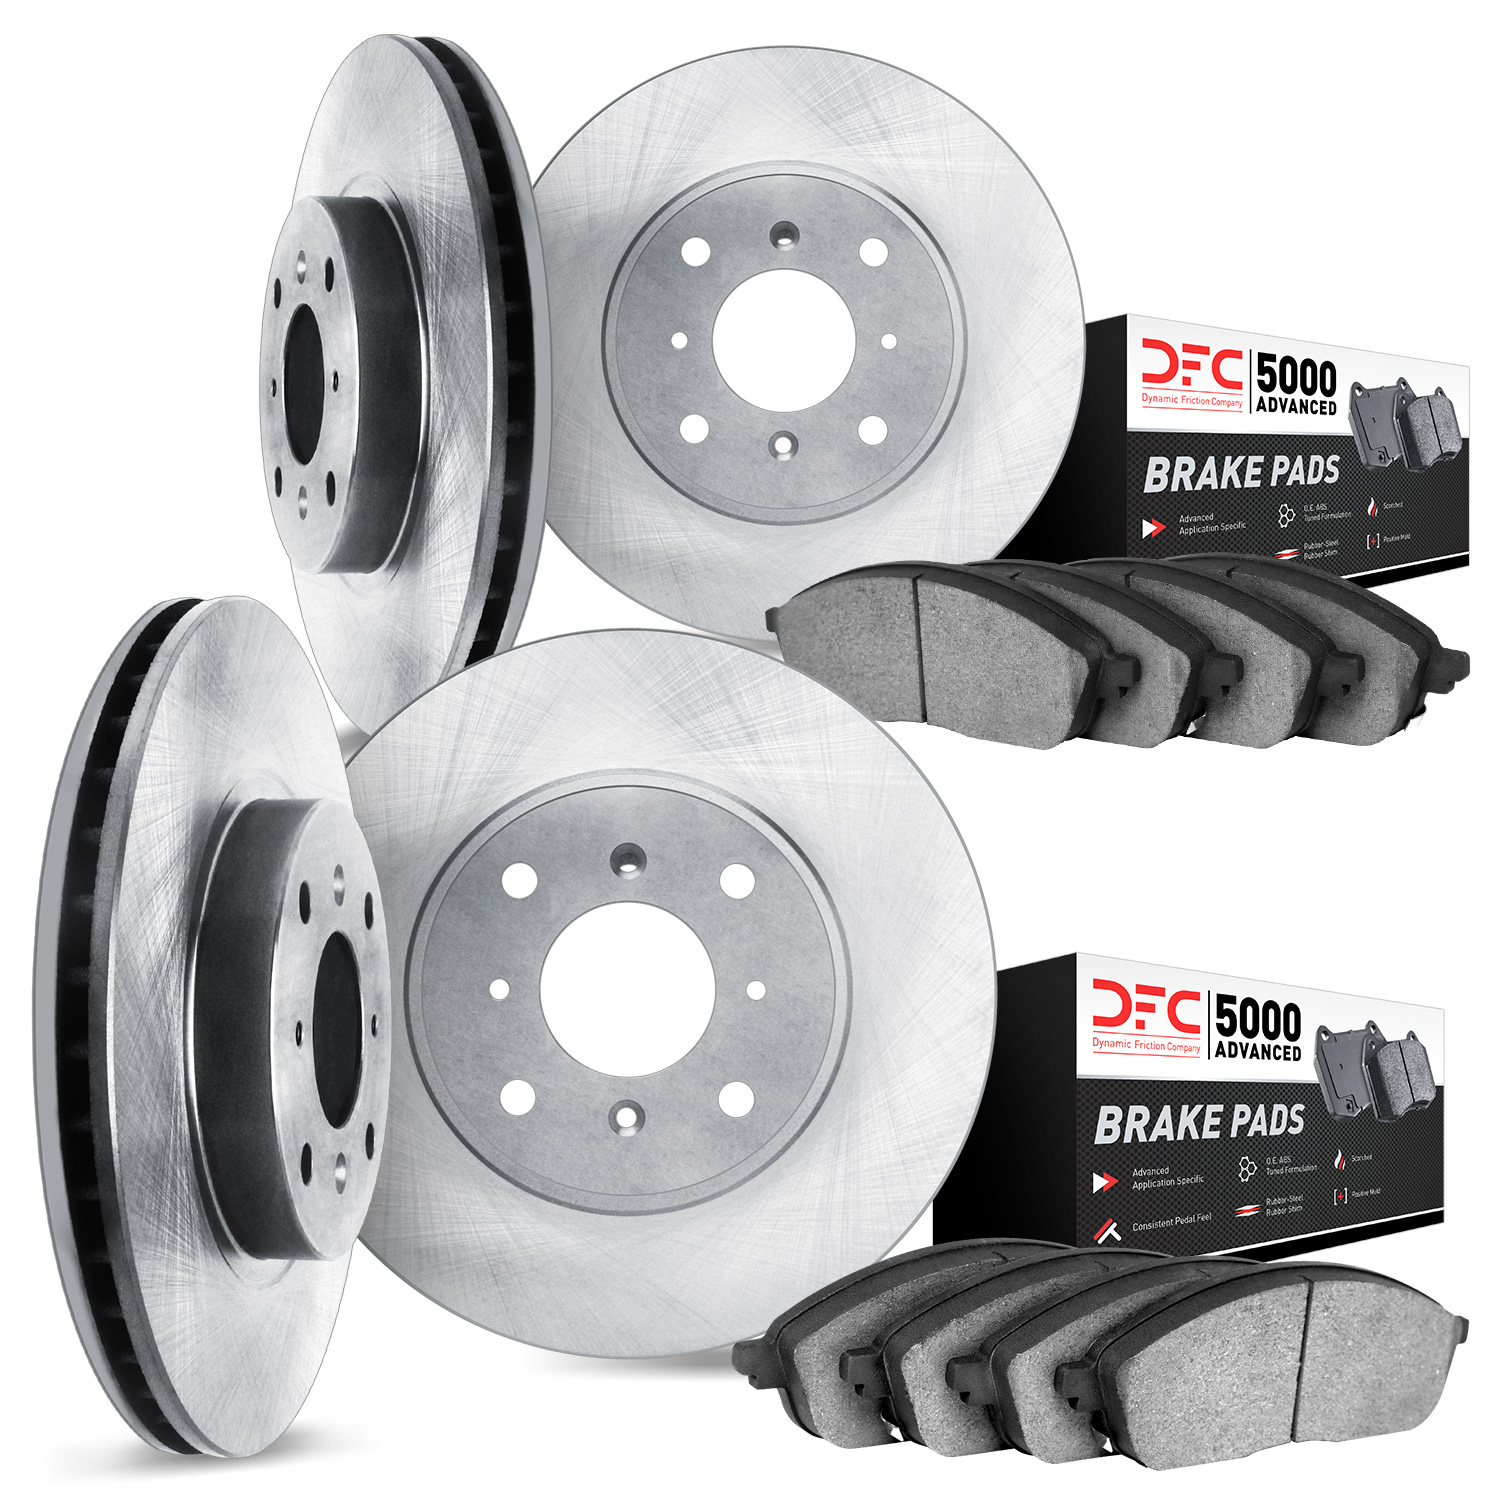 6504-56108 Brake Rotors w/5000 Advanced Brake Pads Kit, 1998-2002 Ford/Lincoln/Mercury/Mazda, Position: Front and Rear